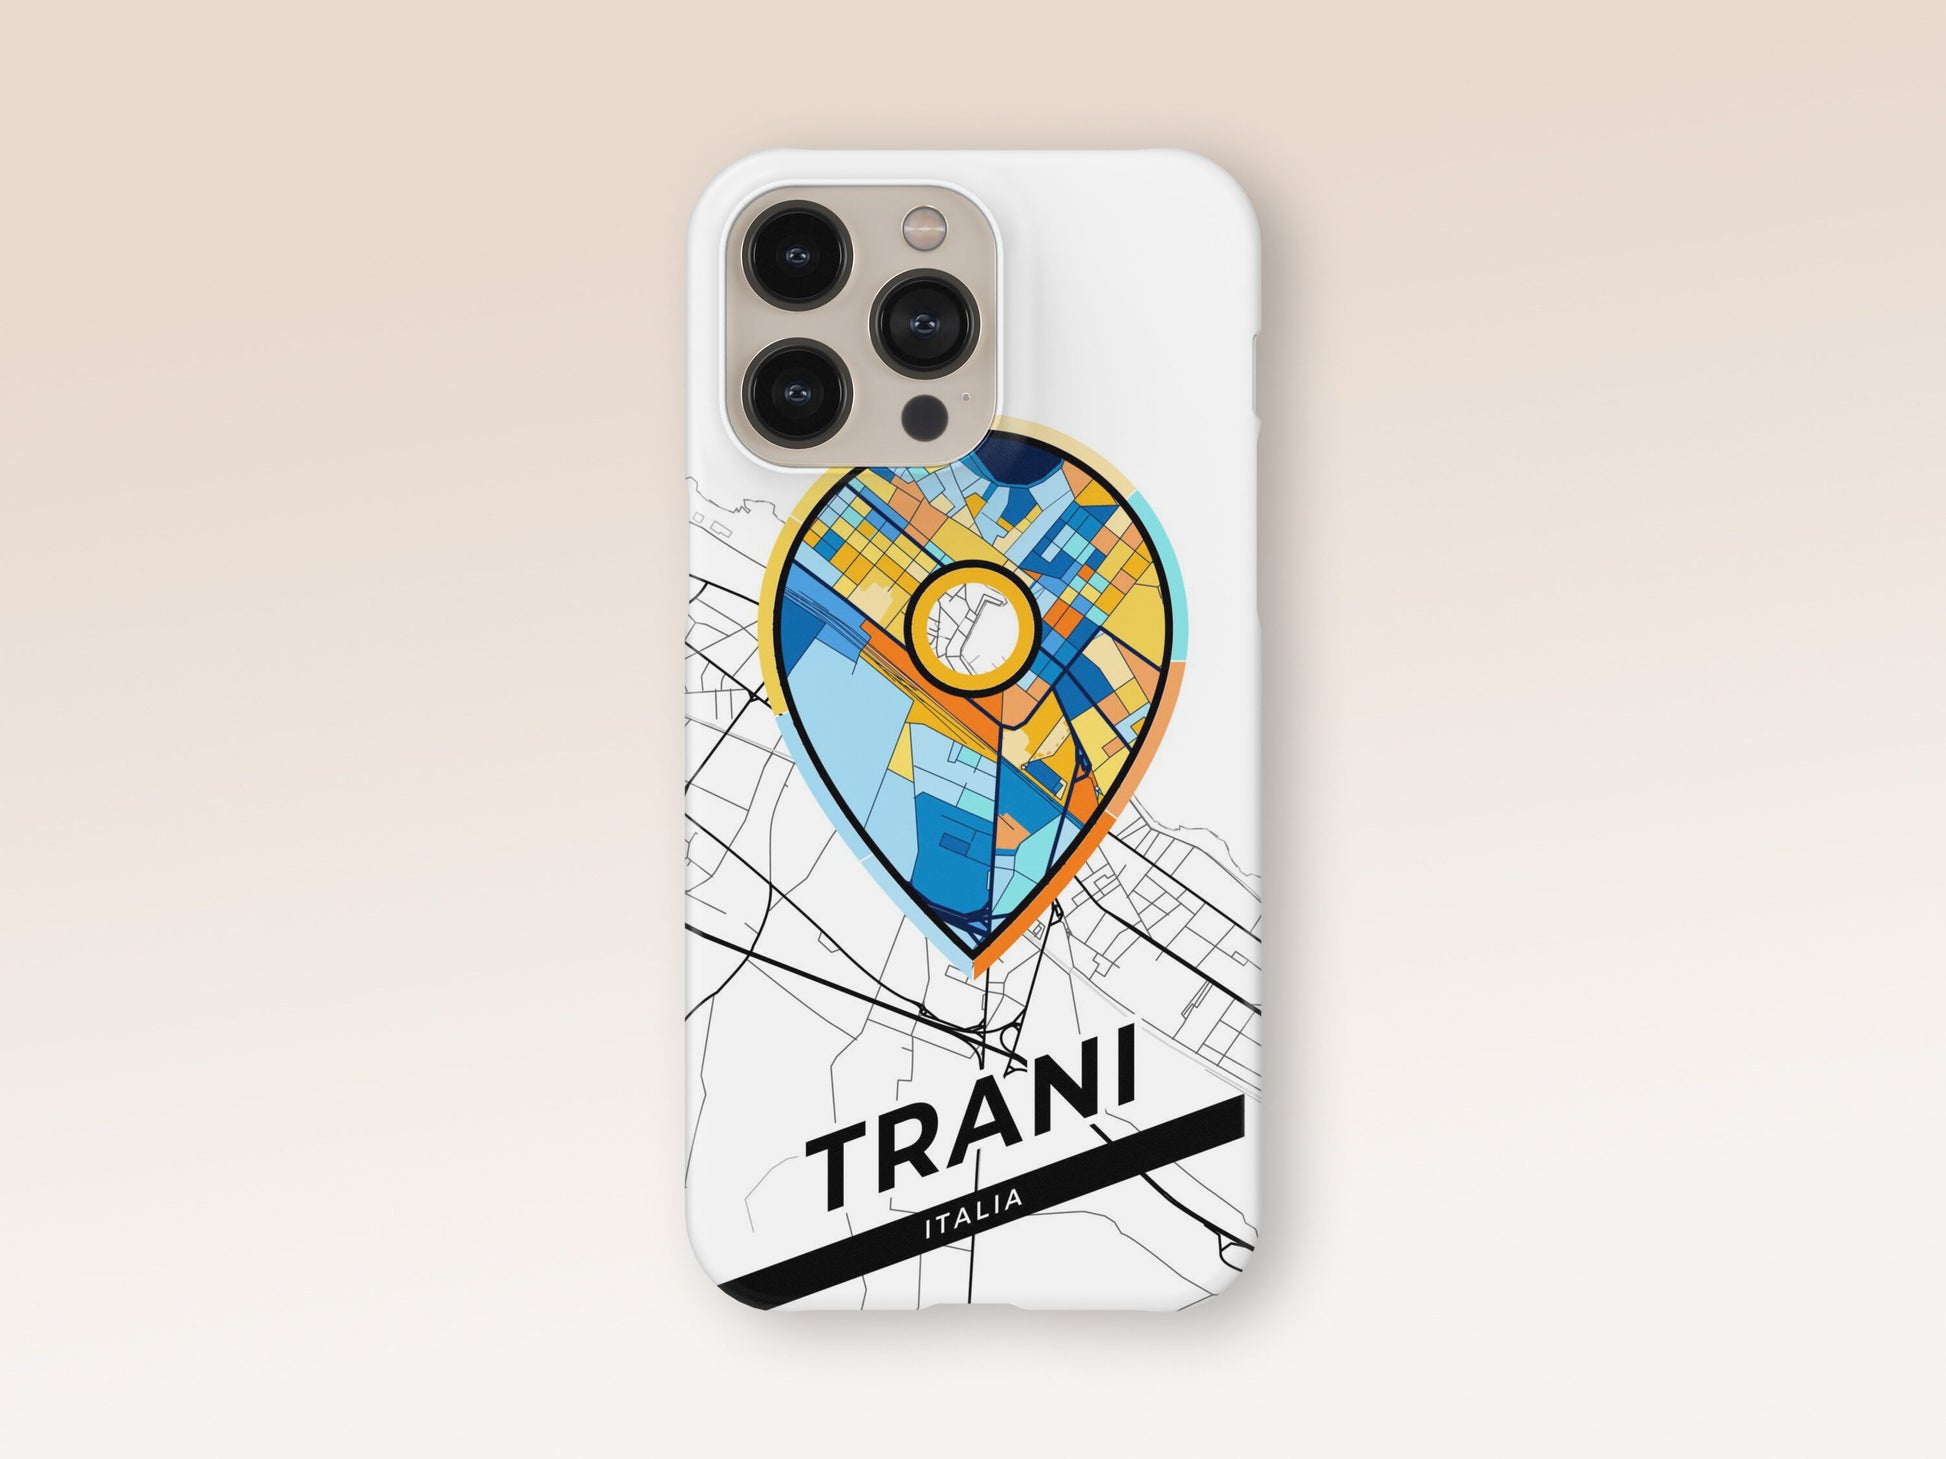 Trani Italy slim phone case with colorful icon 1